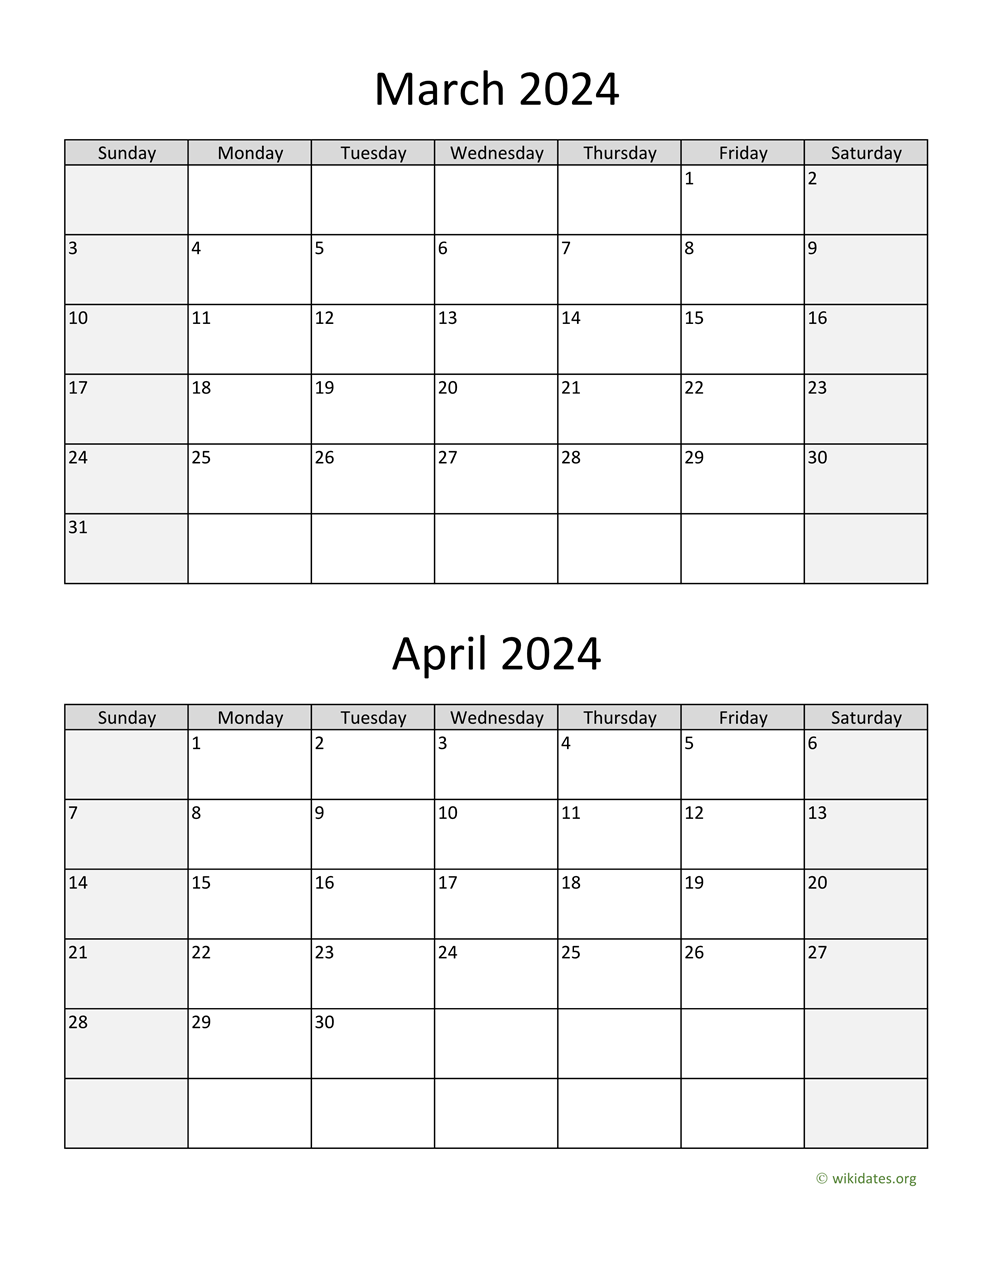 March And April 2024 Calendar | Wikidates for Printable Calendar 2024 March April